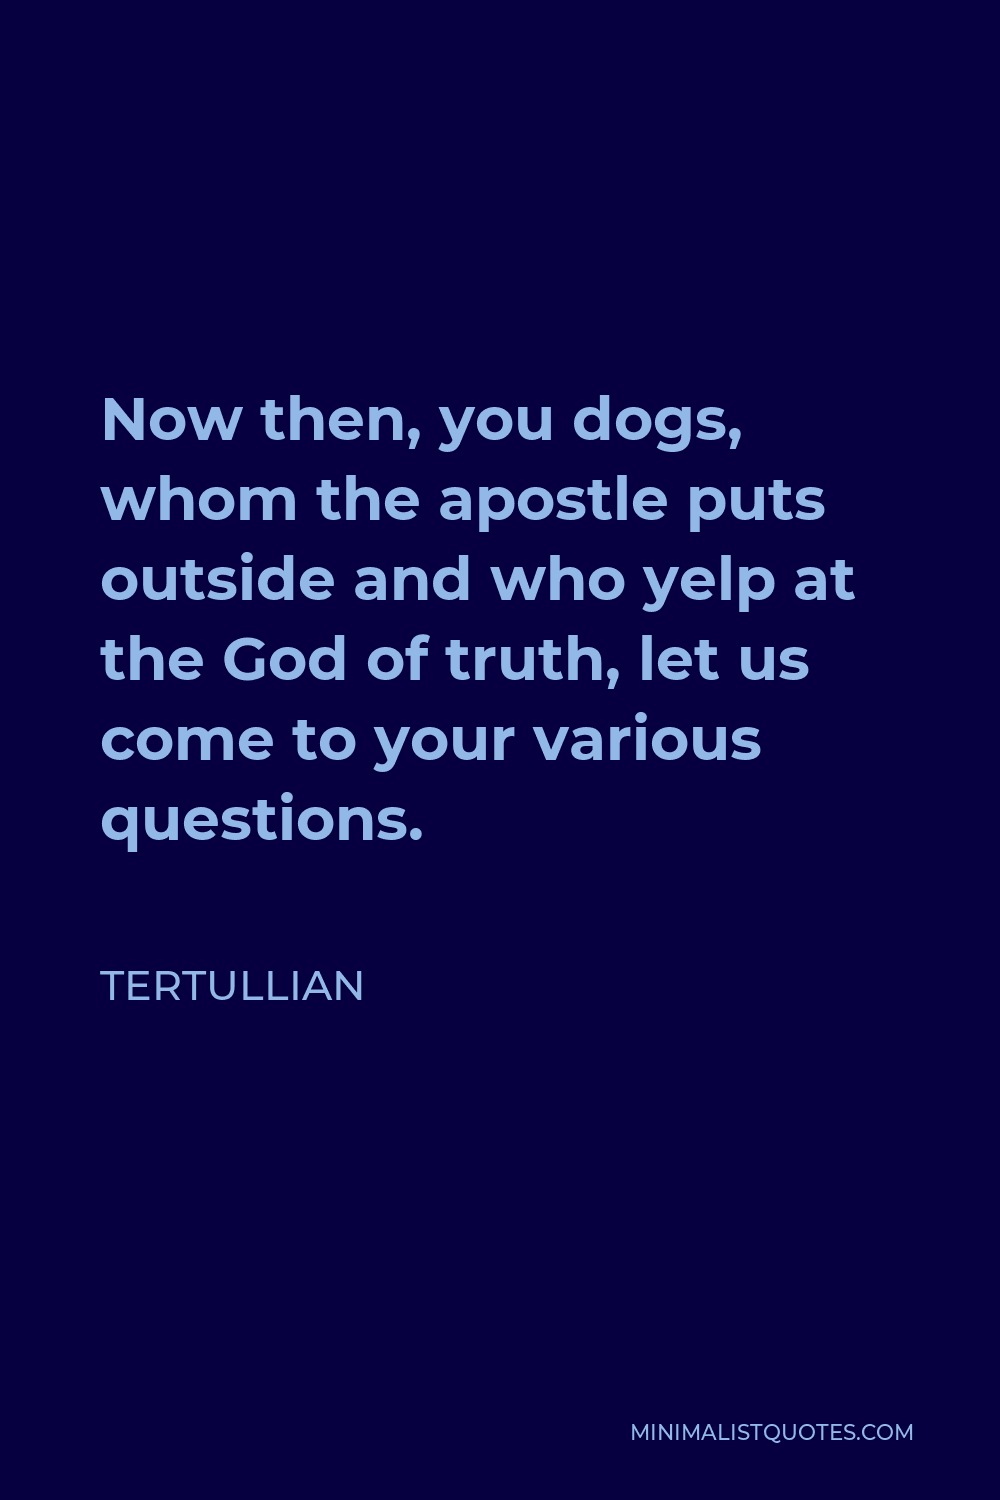 Tertullian Quote - Now then, you dogs, whom the apostle puts outside and who yelp at the God of truth, let us come to your various questions.